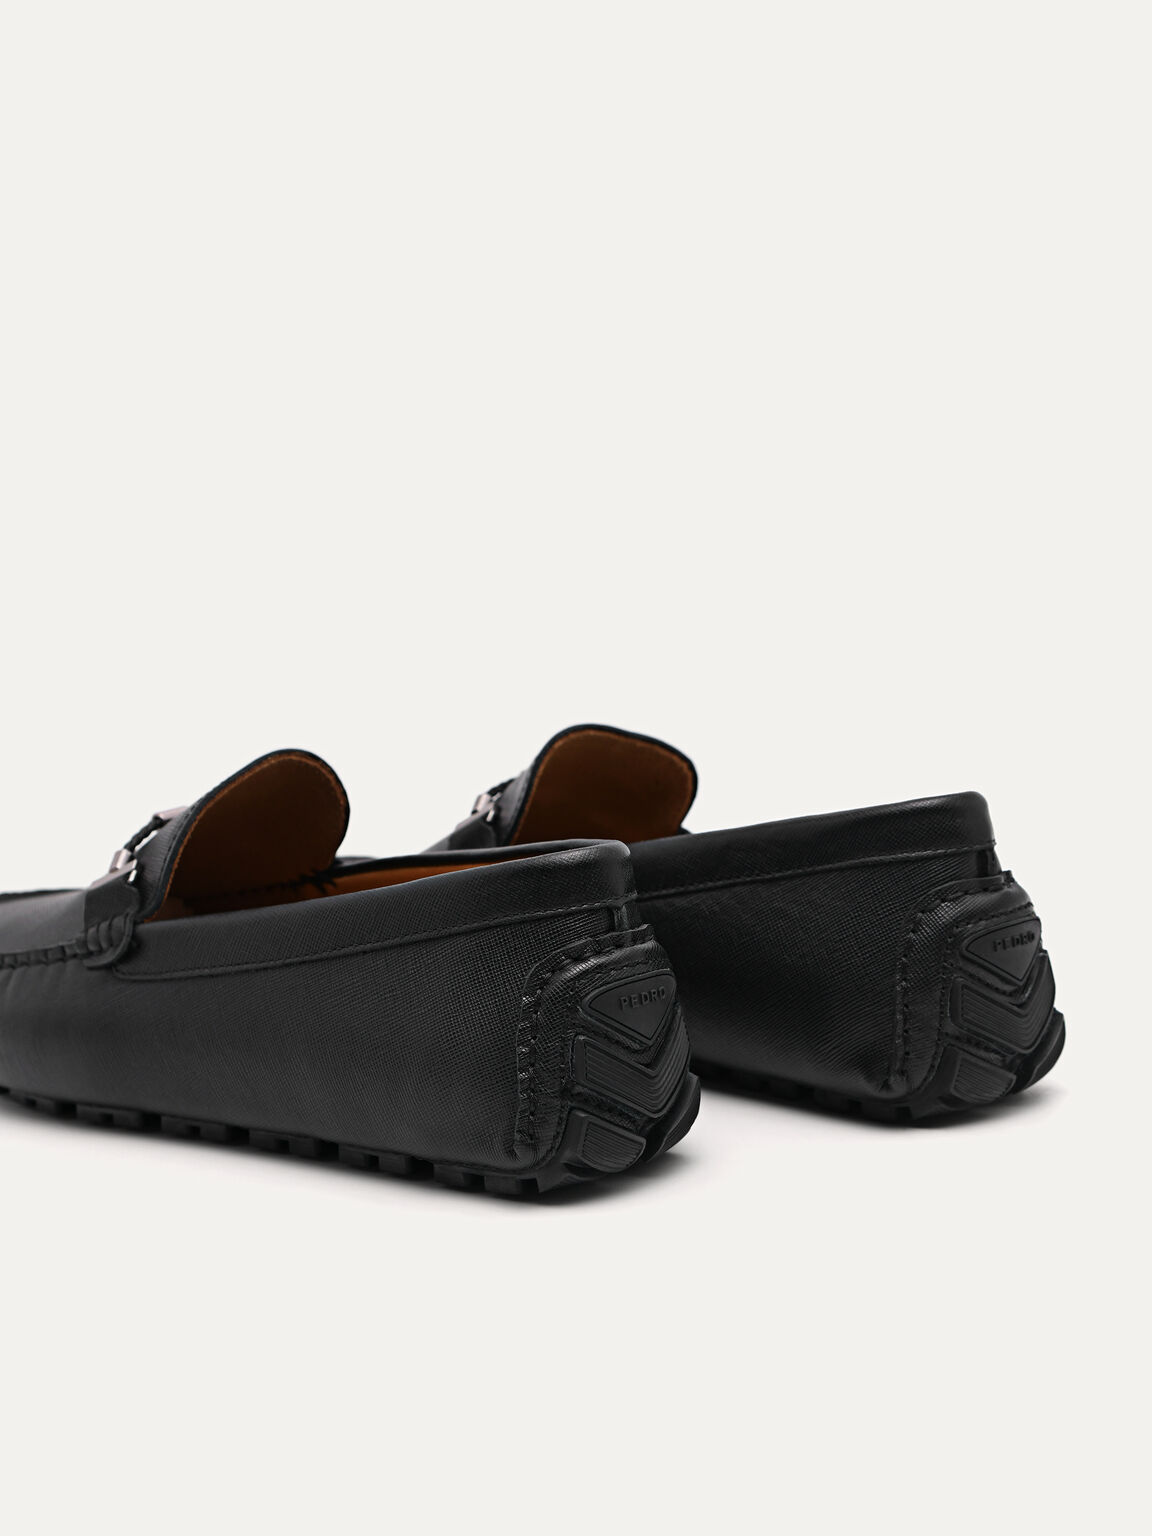 Robert Suede Leather Moccasins, Black